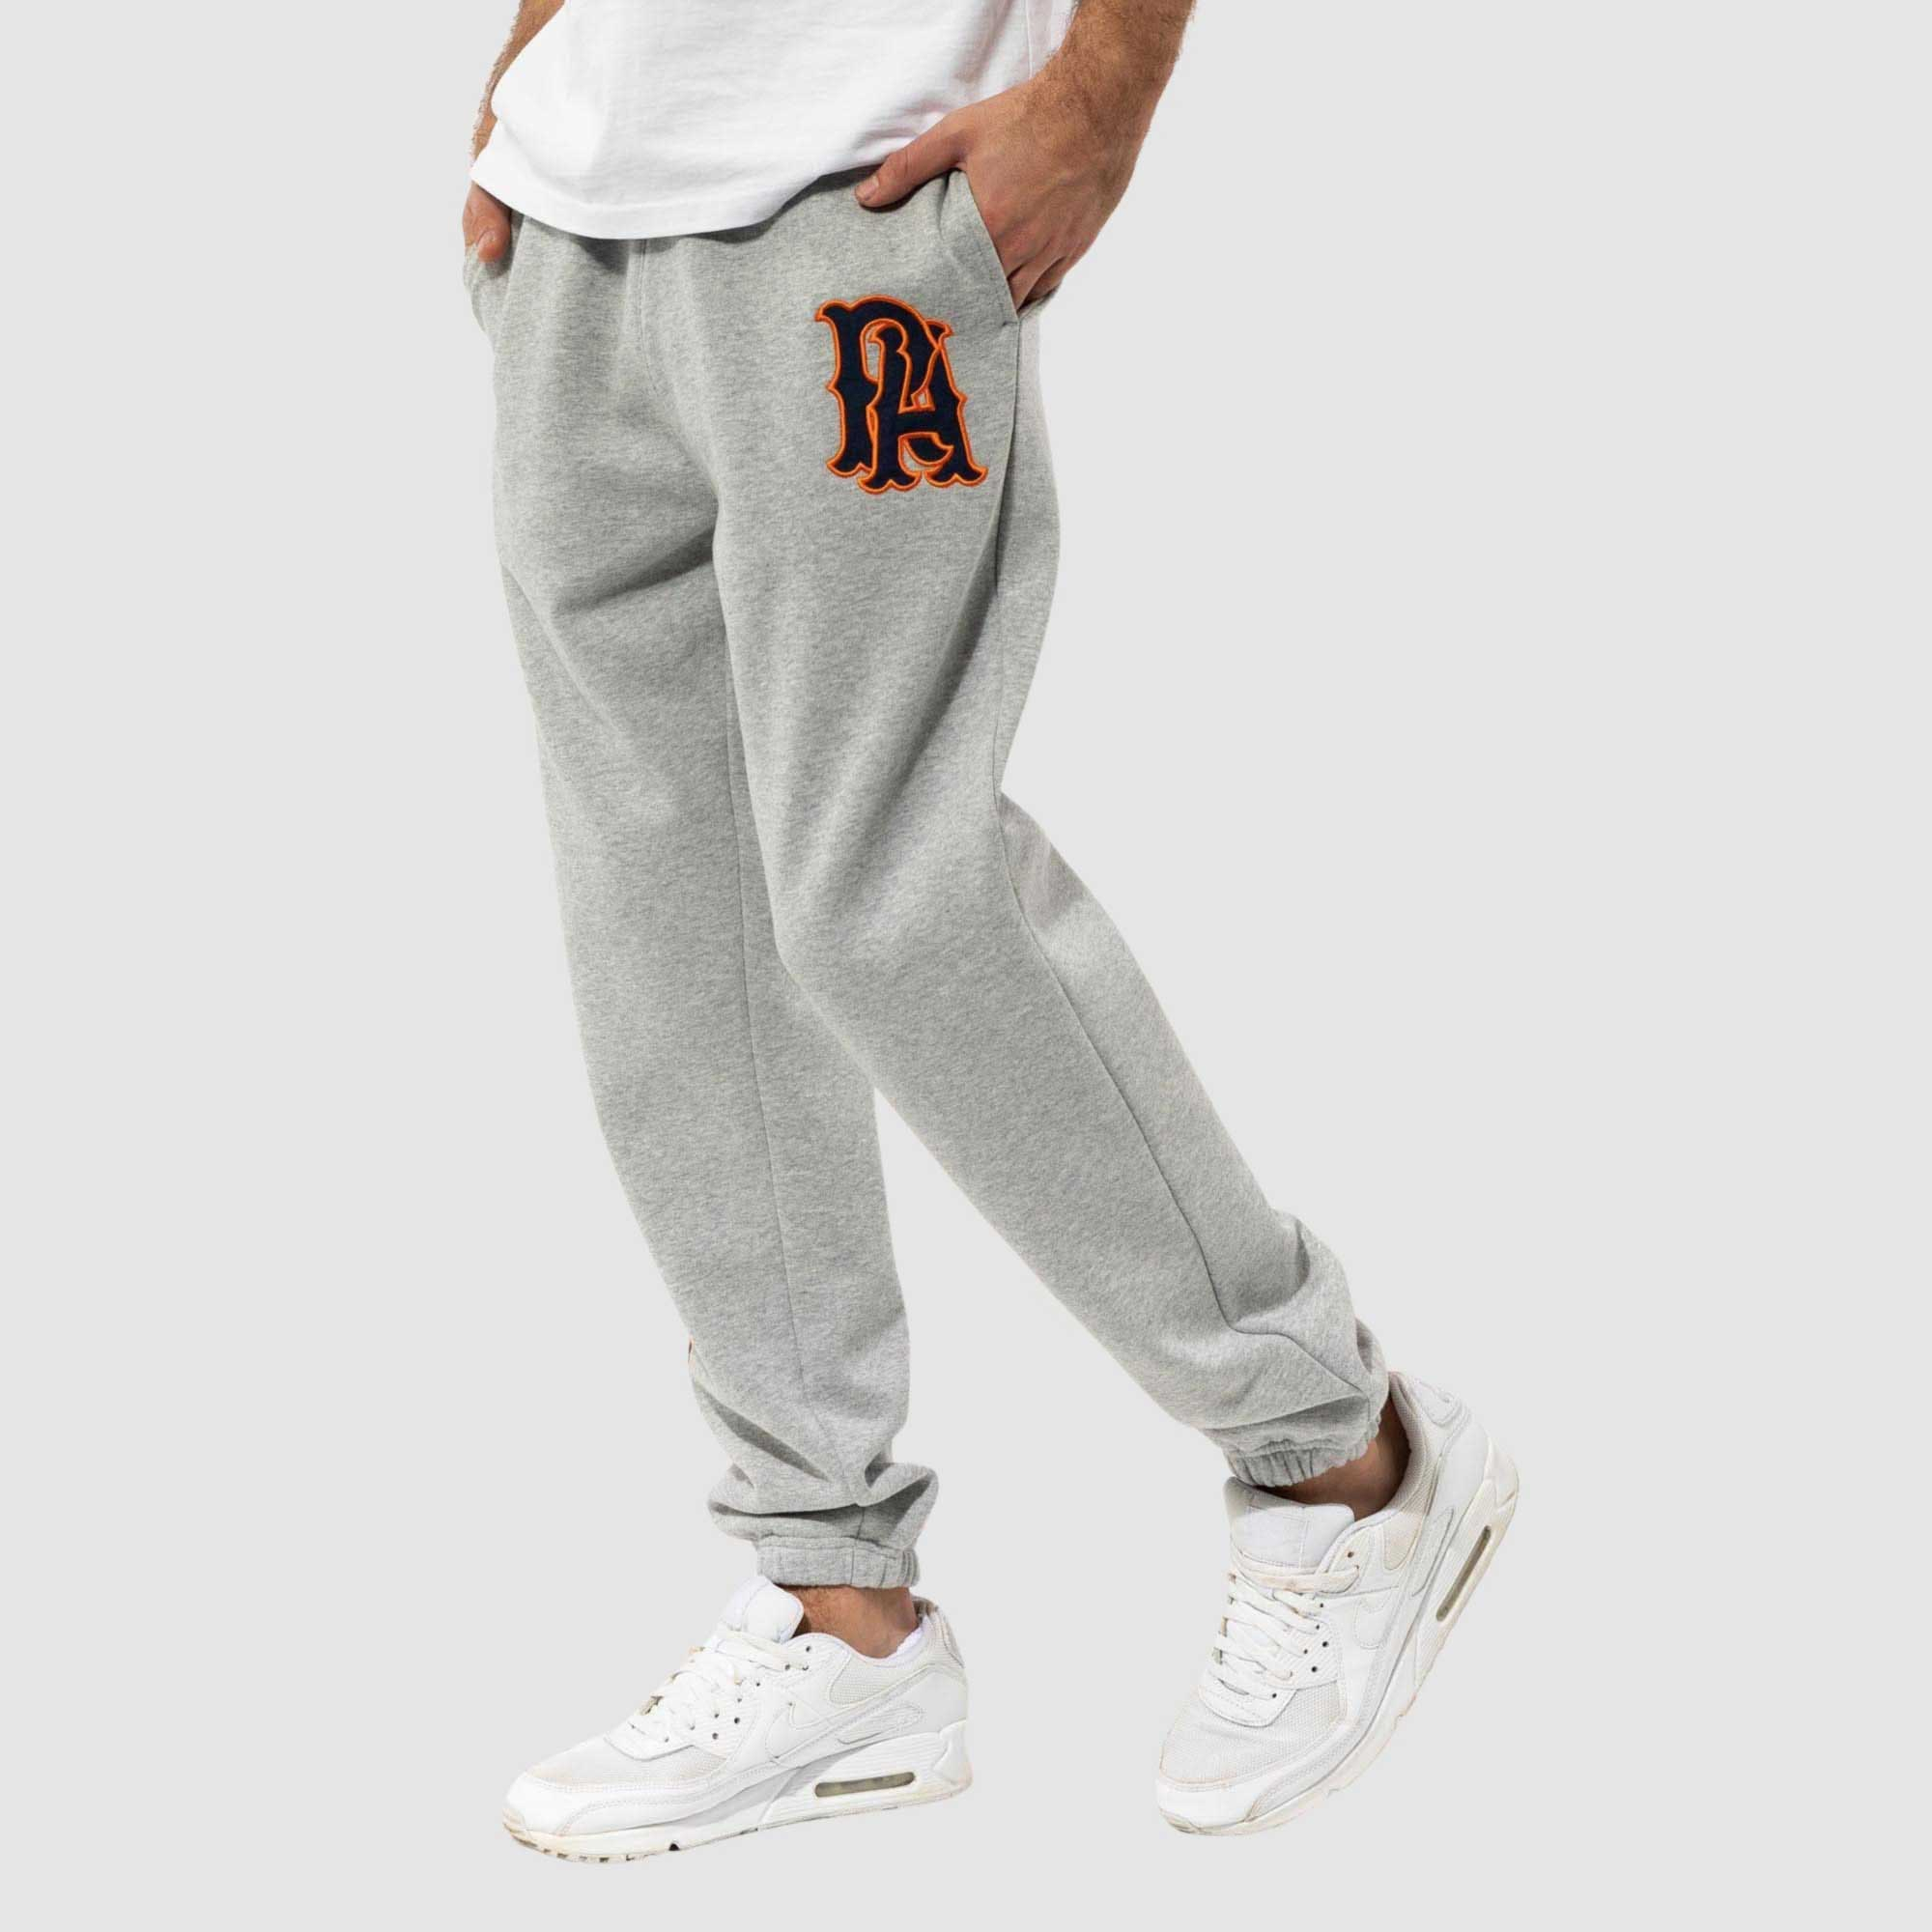 Russell Athletic Mens Workout Pants in Mens Workout Clothing